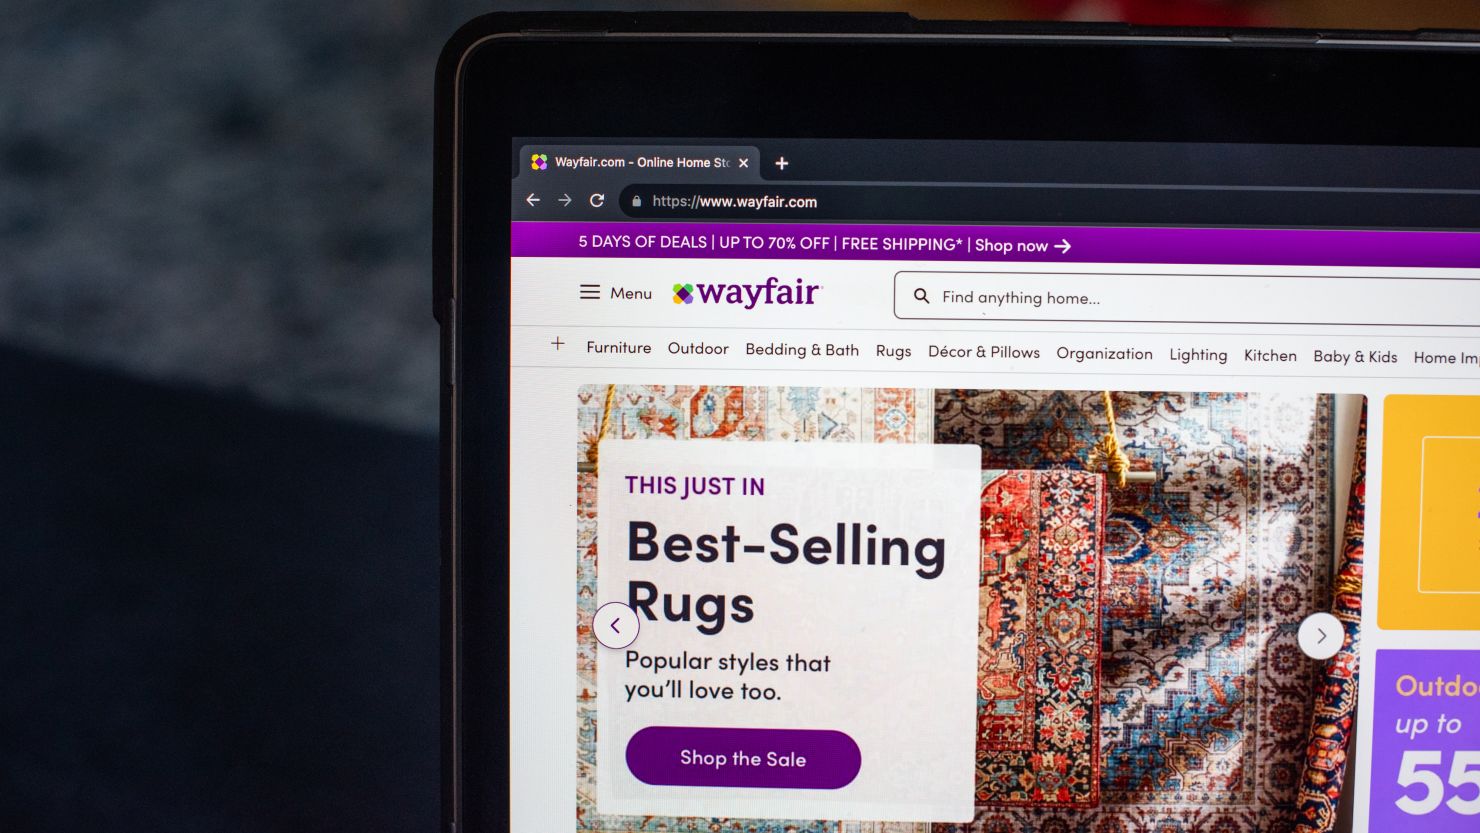 Wayfair is set to open its first physical store next month.